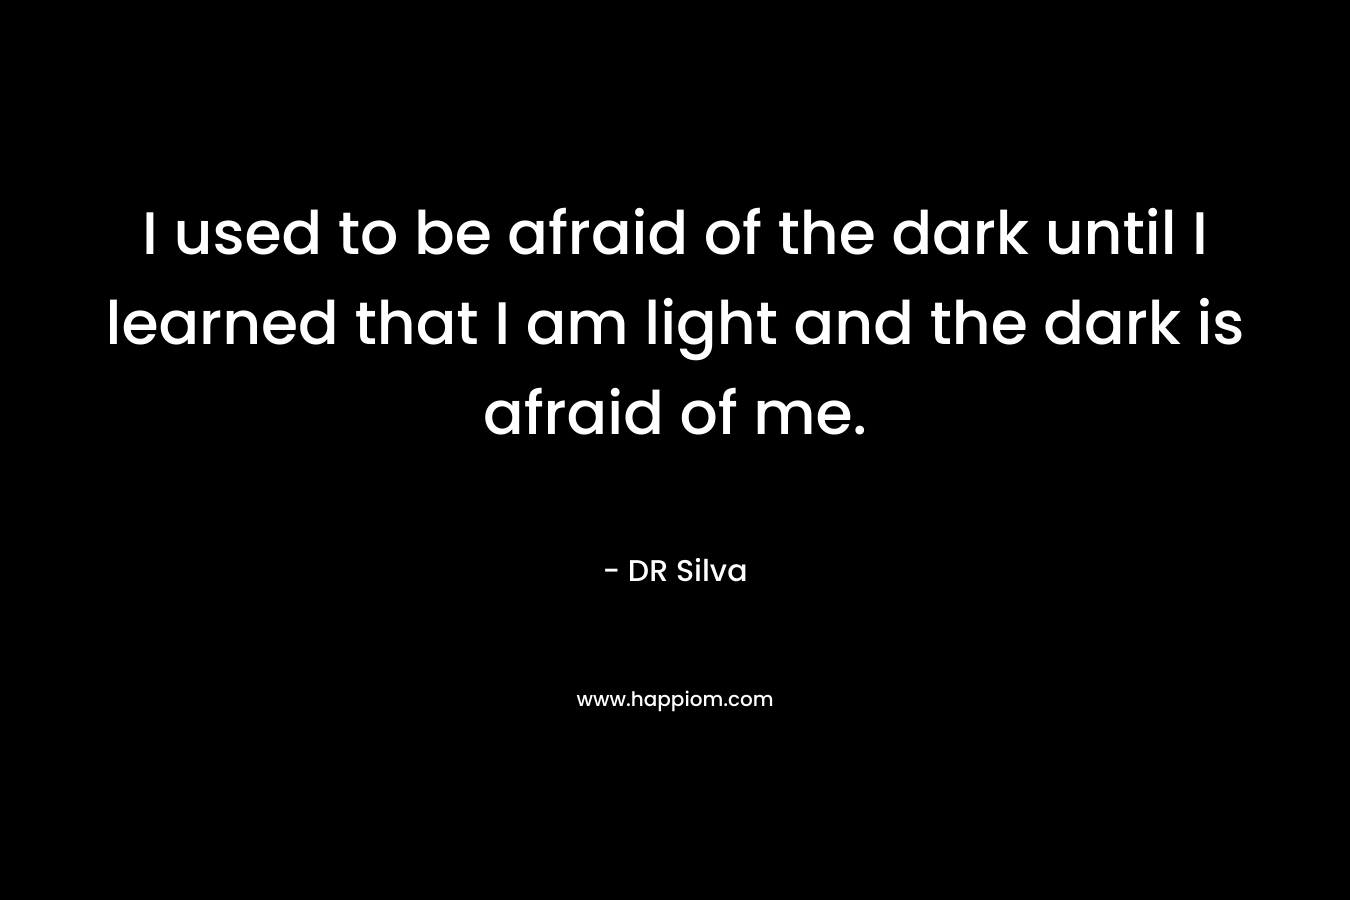 I used to be afraid of the dark until I learned that I am light and the dark is afraid of me.